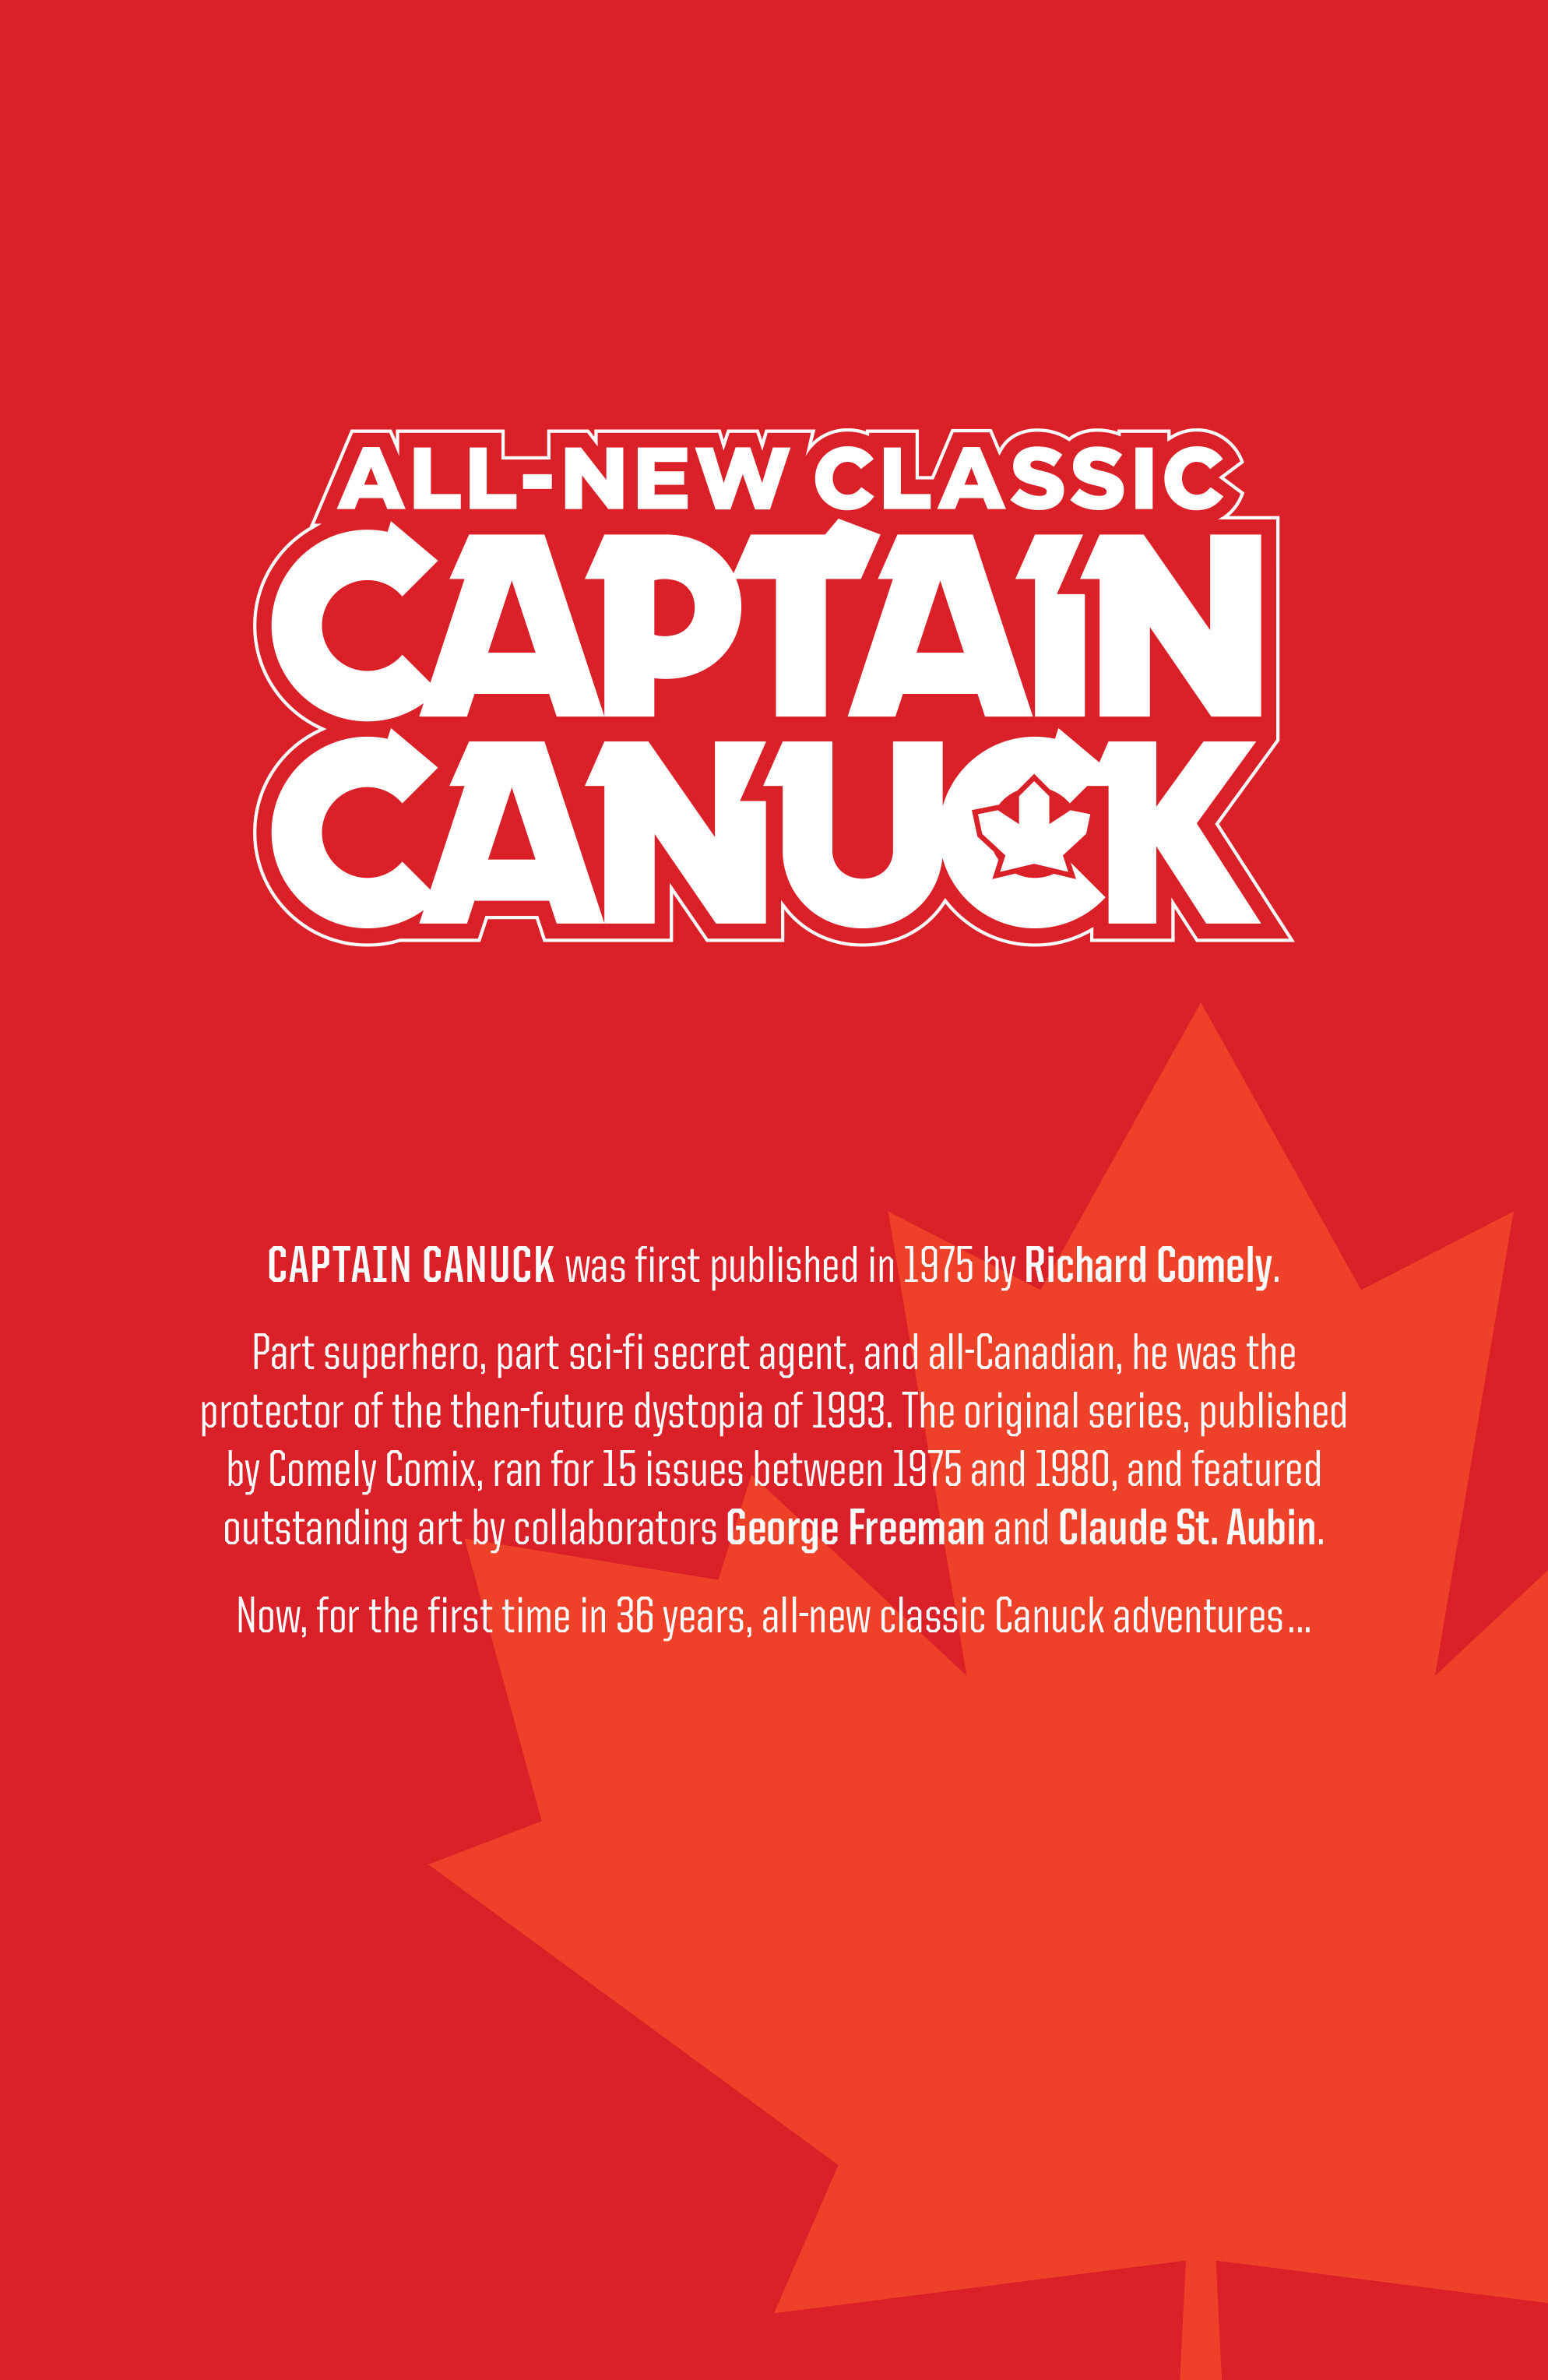 Read online All-New Classic Captain Canuck comic -  Issue #0 - 2